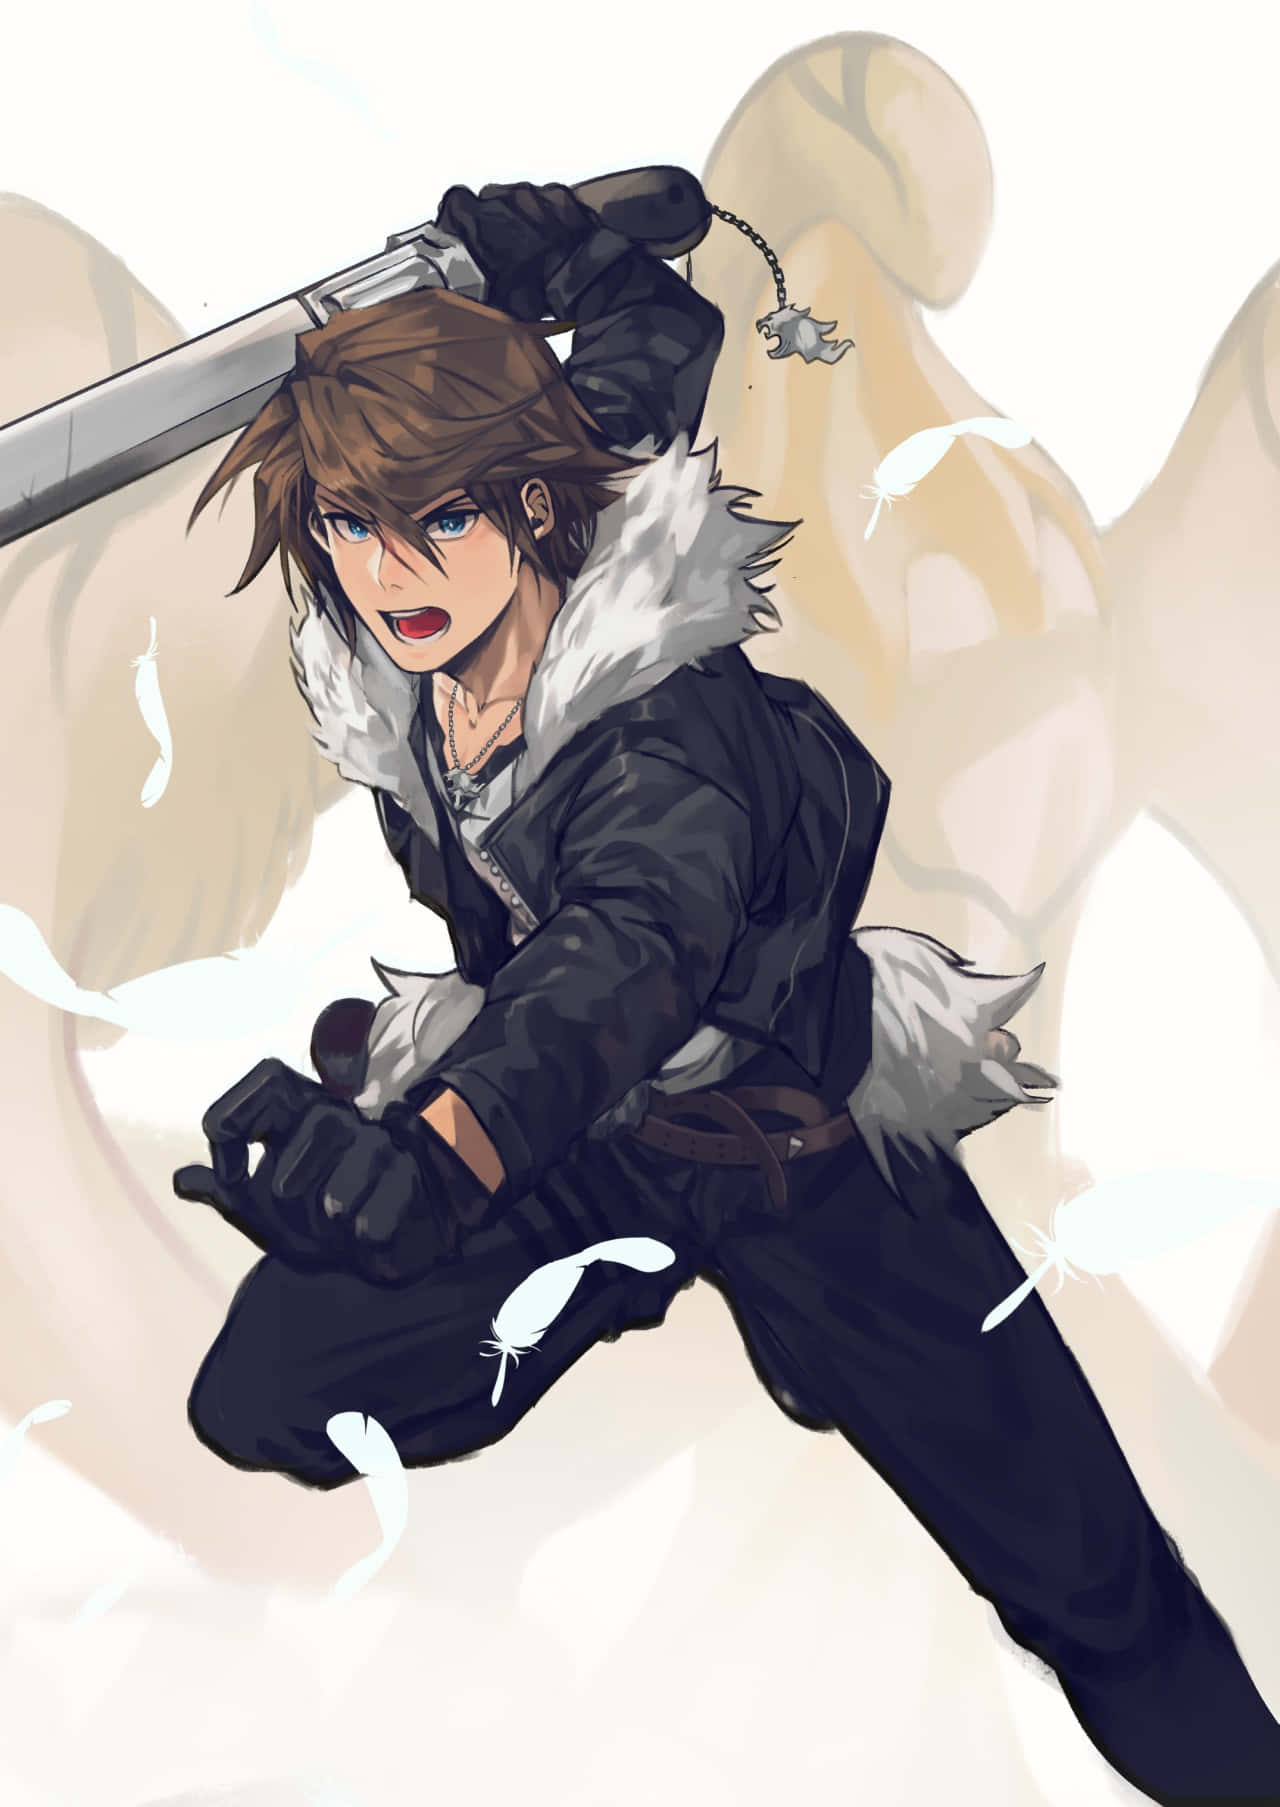 Squall Leonhart From Final Fantasy Viii In Combat Mode Wallpaper